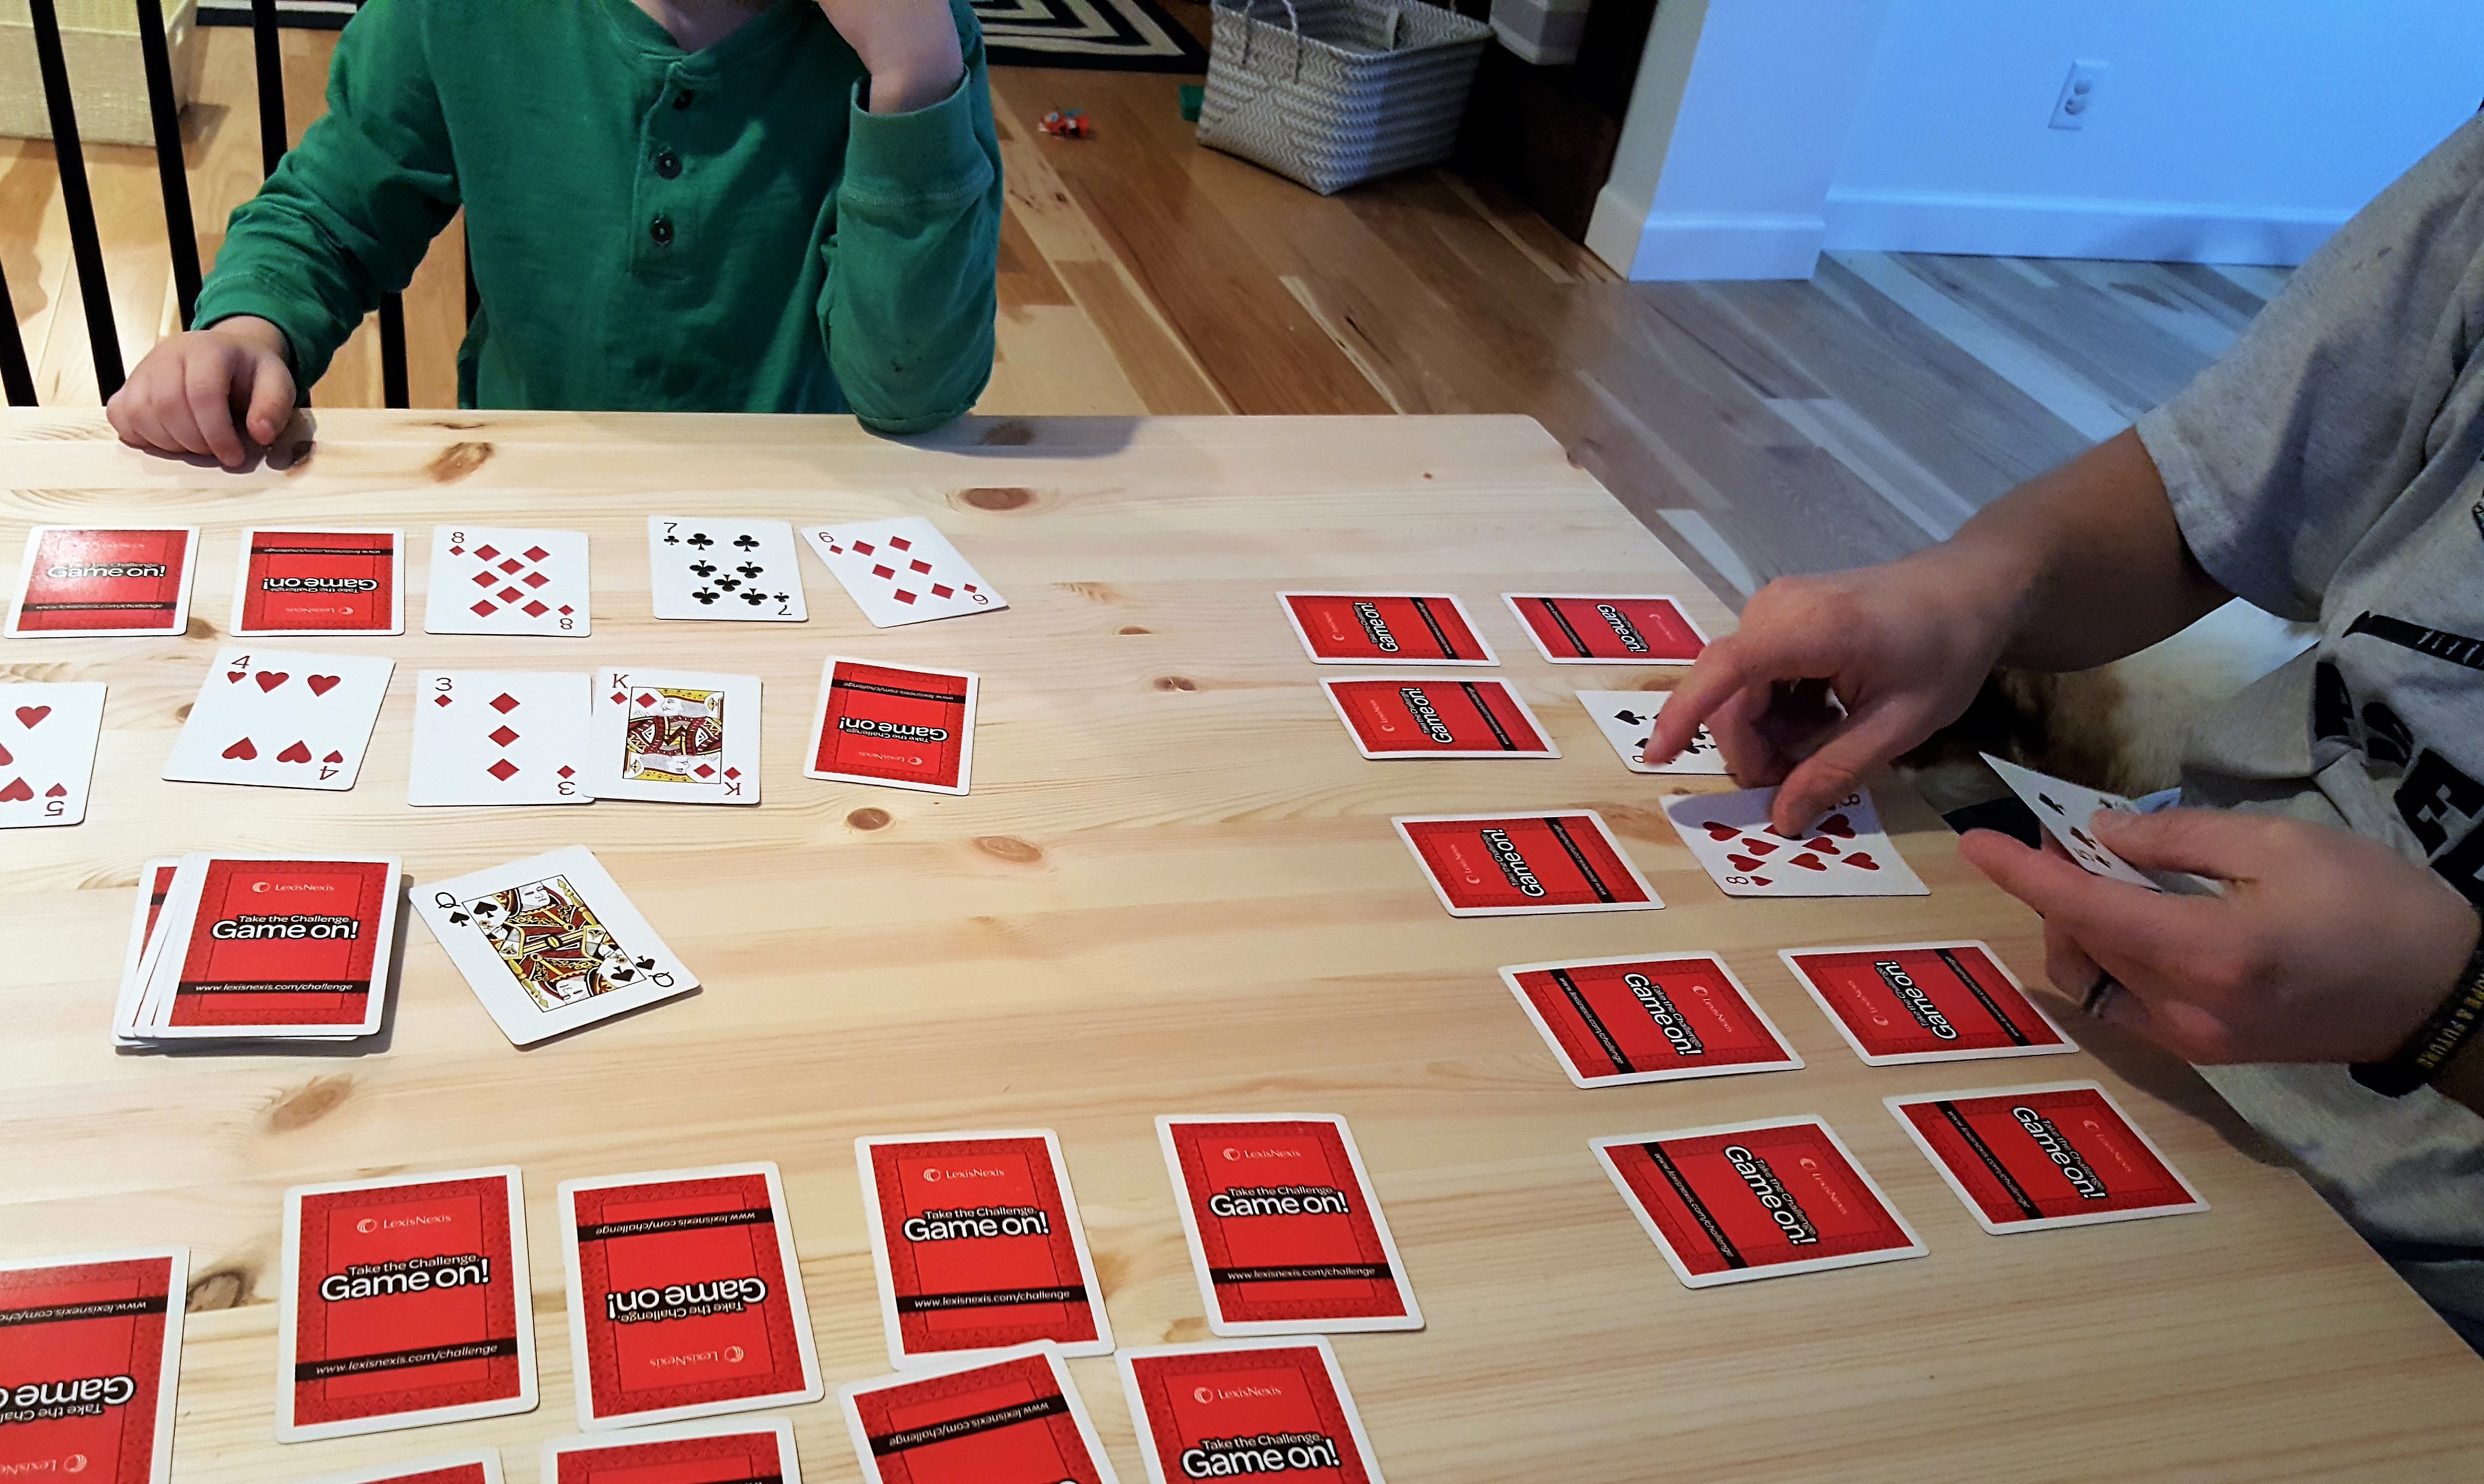 A math card game called Rubbish teaches your child base ten, numbers, and strategy with a bit of luck thrown in for lots of laughs.